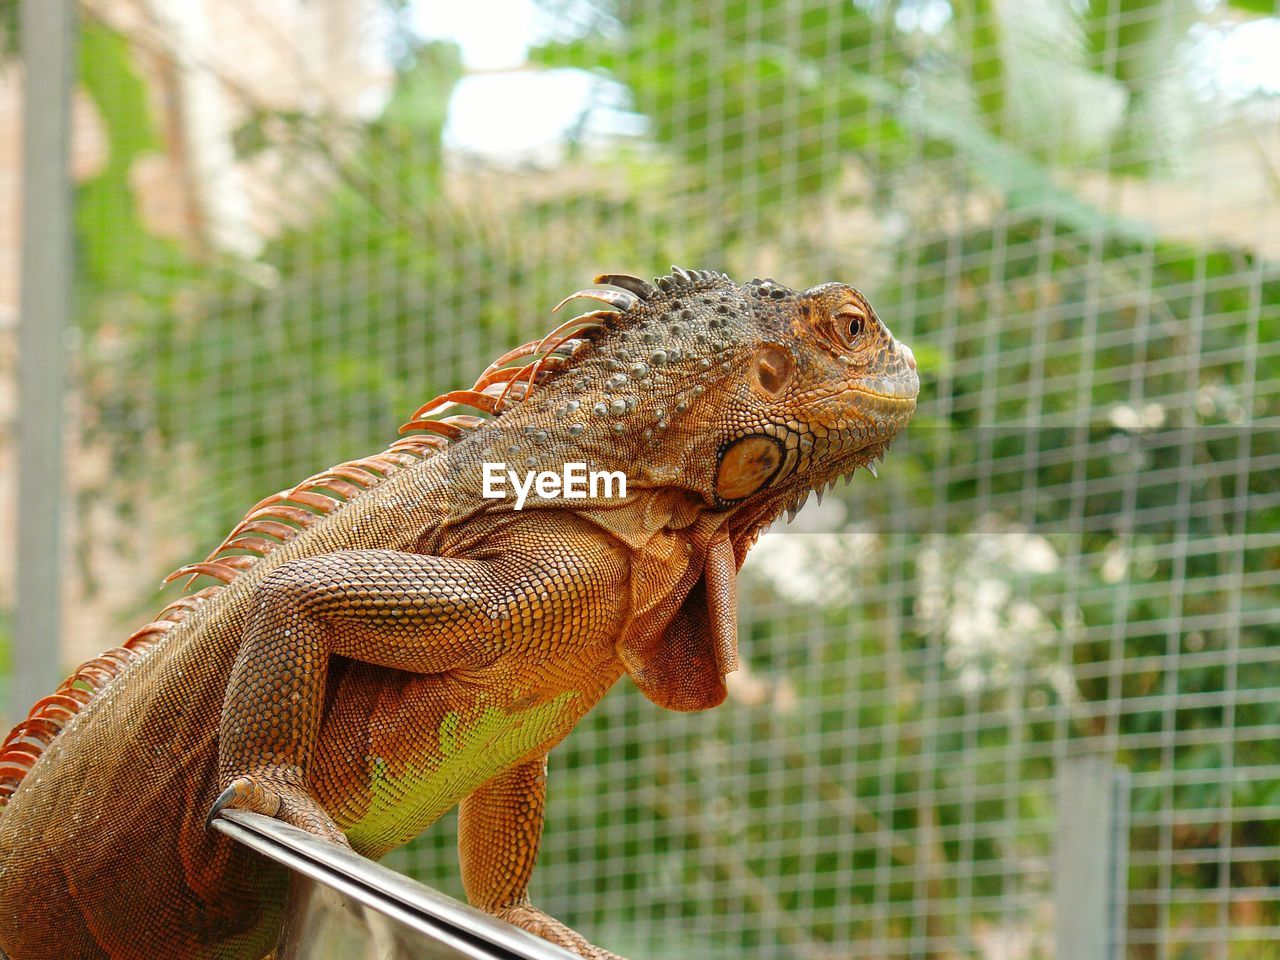 Low angle view of orange iguana in cage at zoo